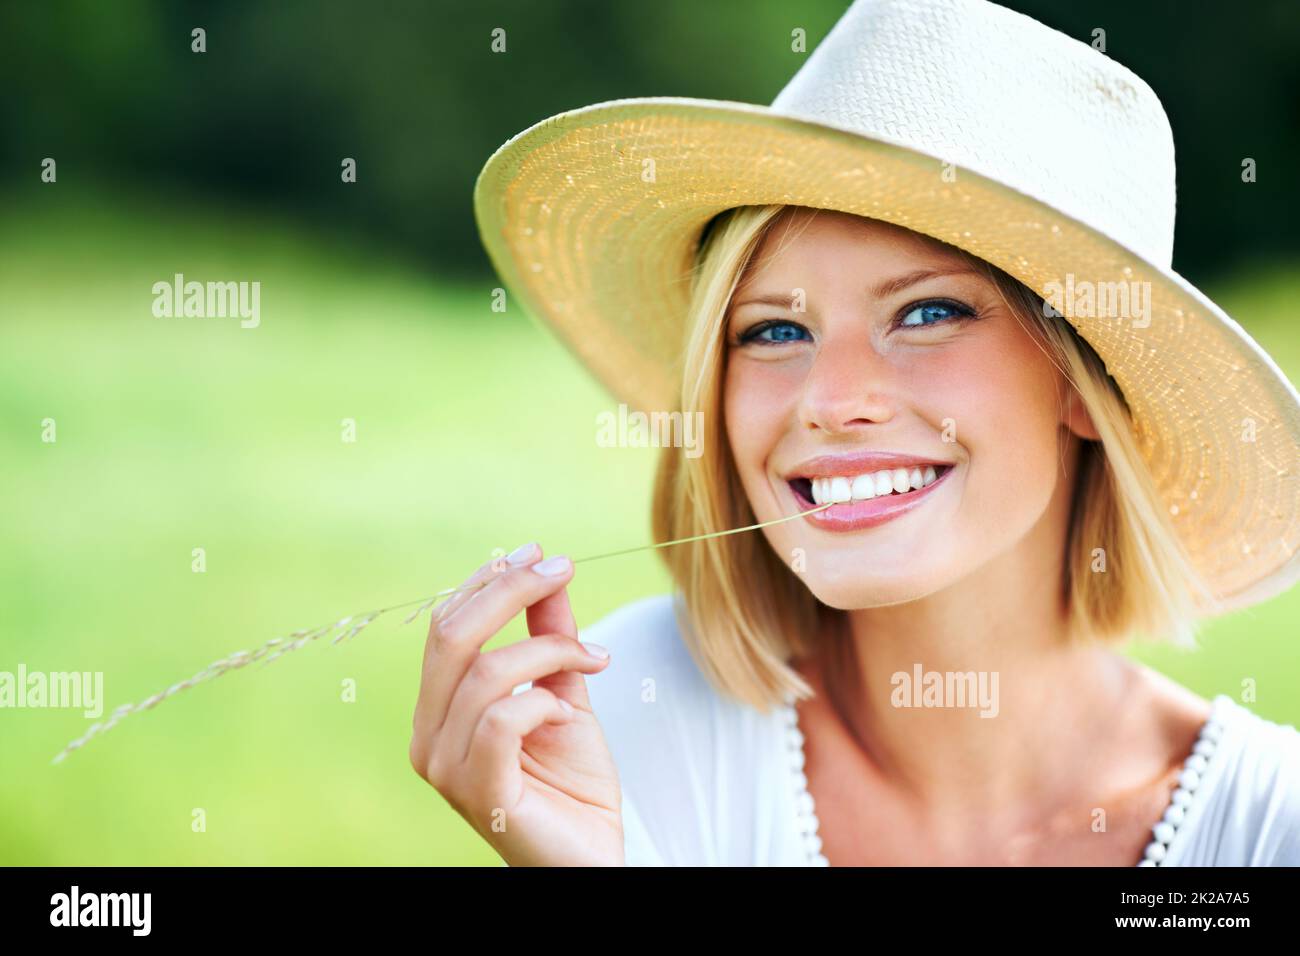 Countryside cutie. Cute young woman smiling while wearing a hat and chewing a wheat stalk. Stock Photo